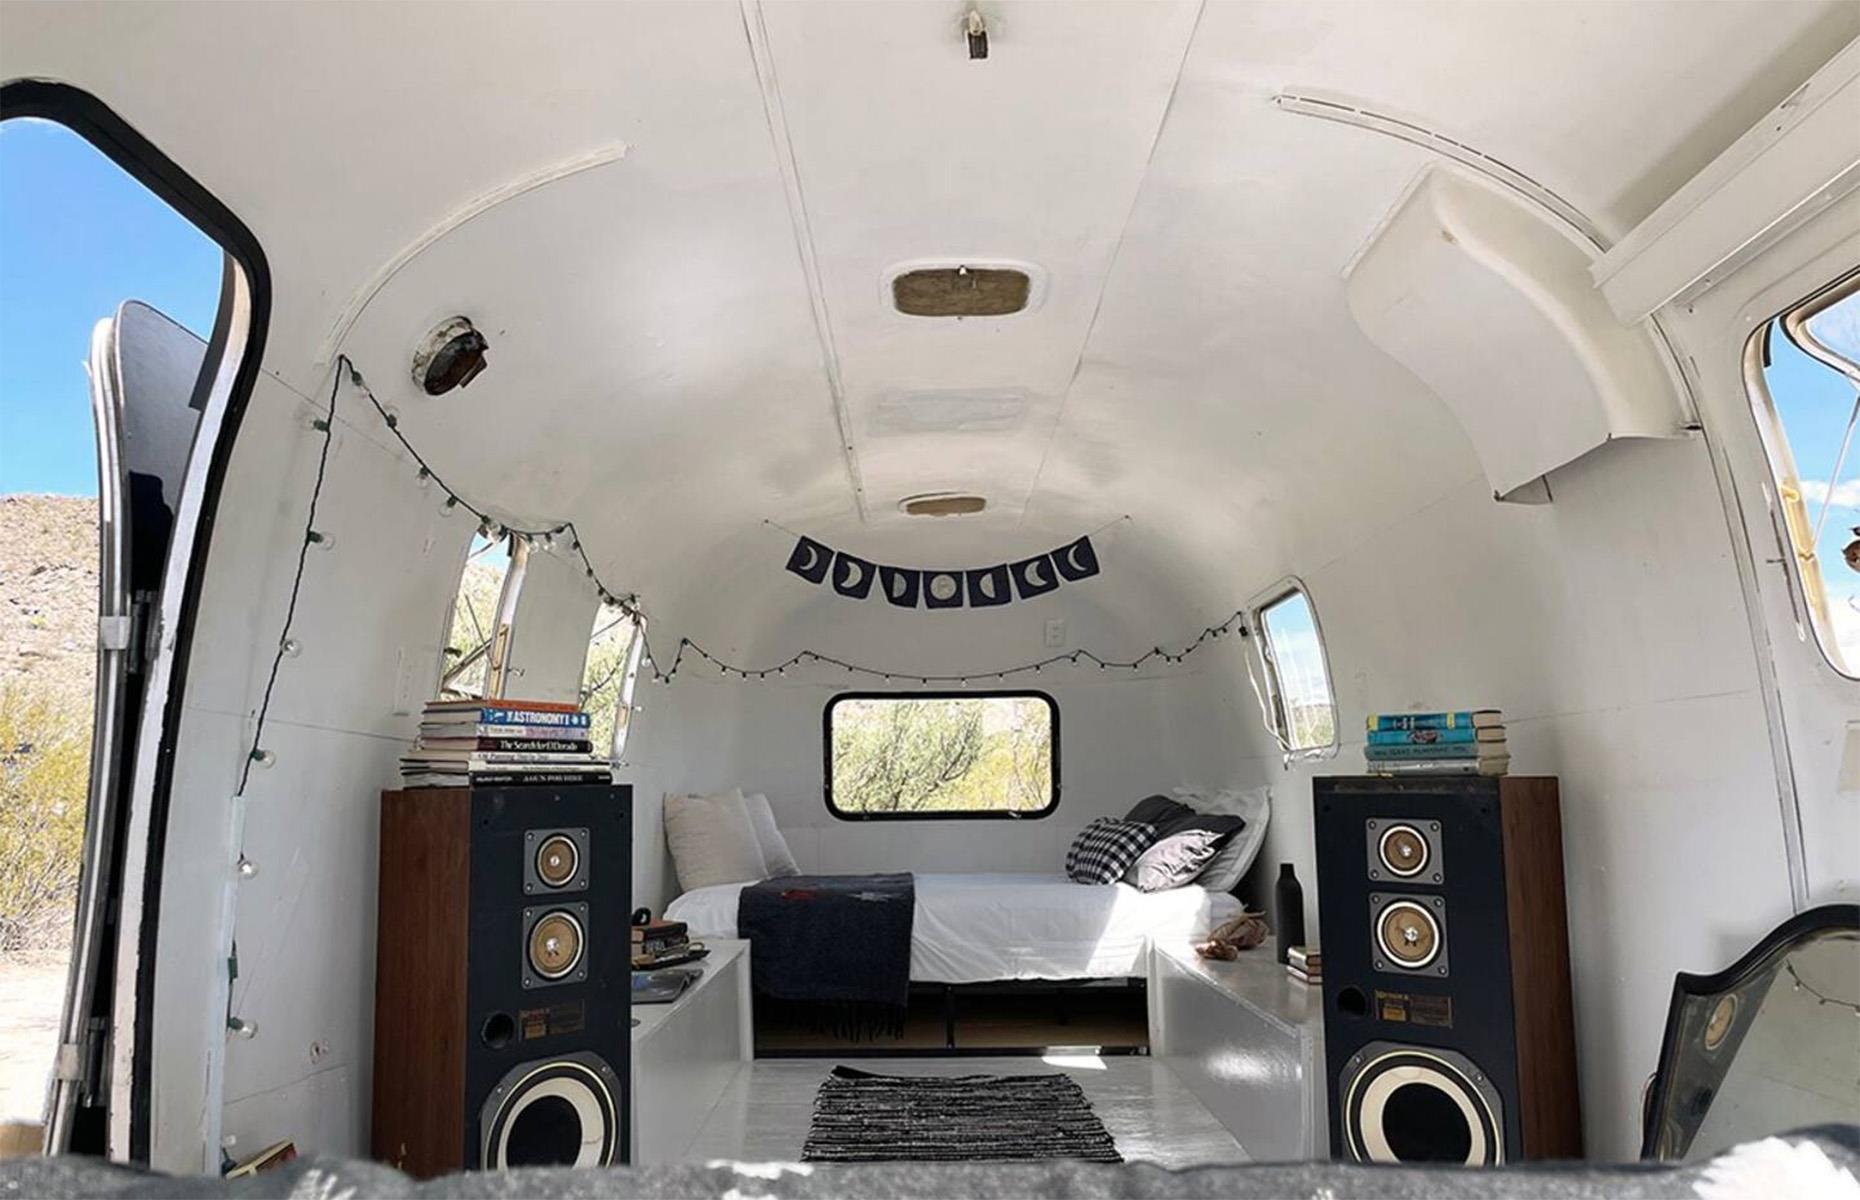 <p>The Airstream itself is a travel trailer dating from the late 1960s, which has been entirely remodeled to include a stylish, minimalistic interior with a queen-size bed and convertible sofa.</p>  <p>The <a href="https://www.airbnb.co.uk/rooms/42075286">Airbnb listing</a> states that there's no Wi-Fi at the site, meaning that this unique retreat offers the perfect opportunity to disconnect, soak up the natural surrounds and embrace a slower pace of life off the grid. </p>